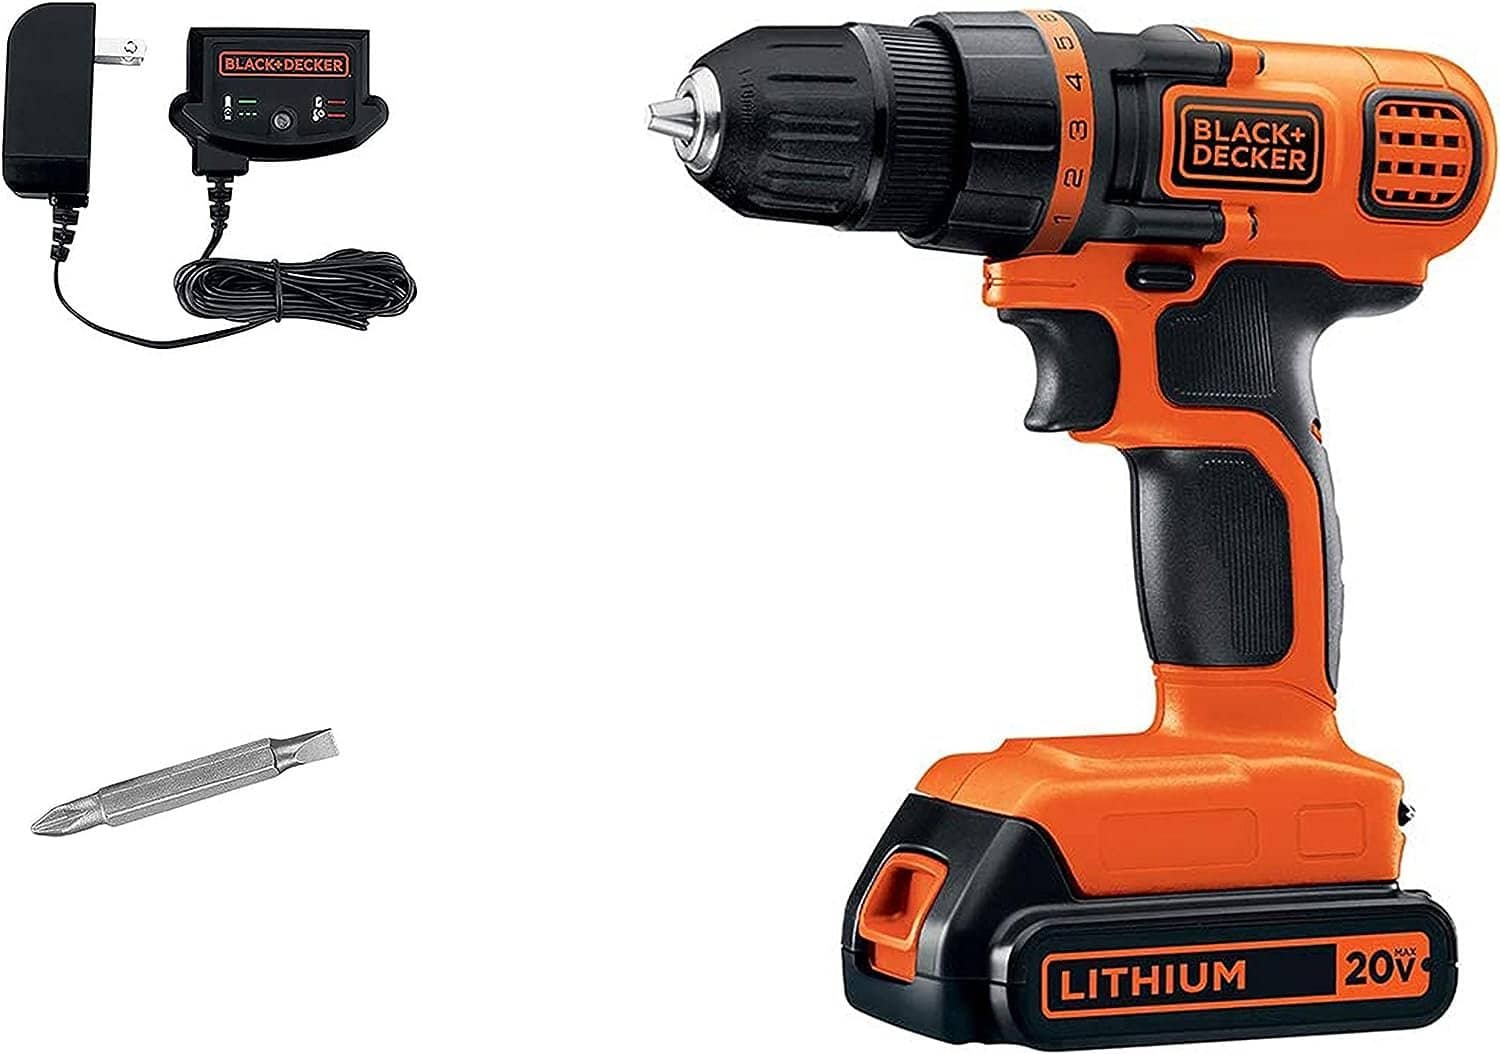 blackdecker 20v max cordless drill and driver 38 inch with led work light battery and charger included ldx120c 3